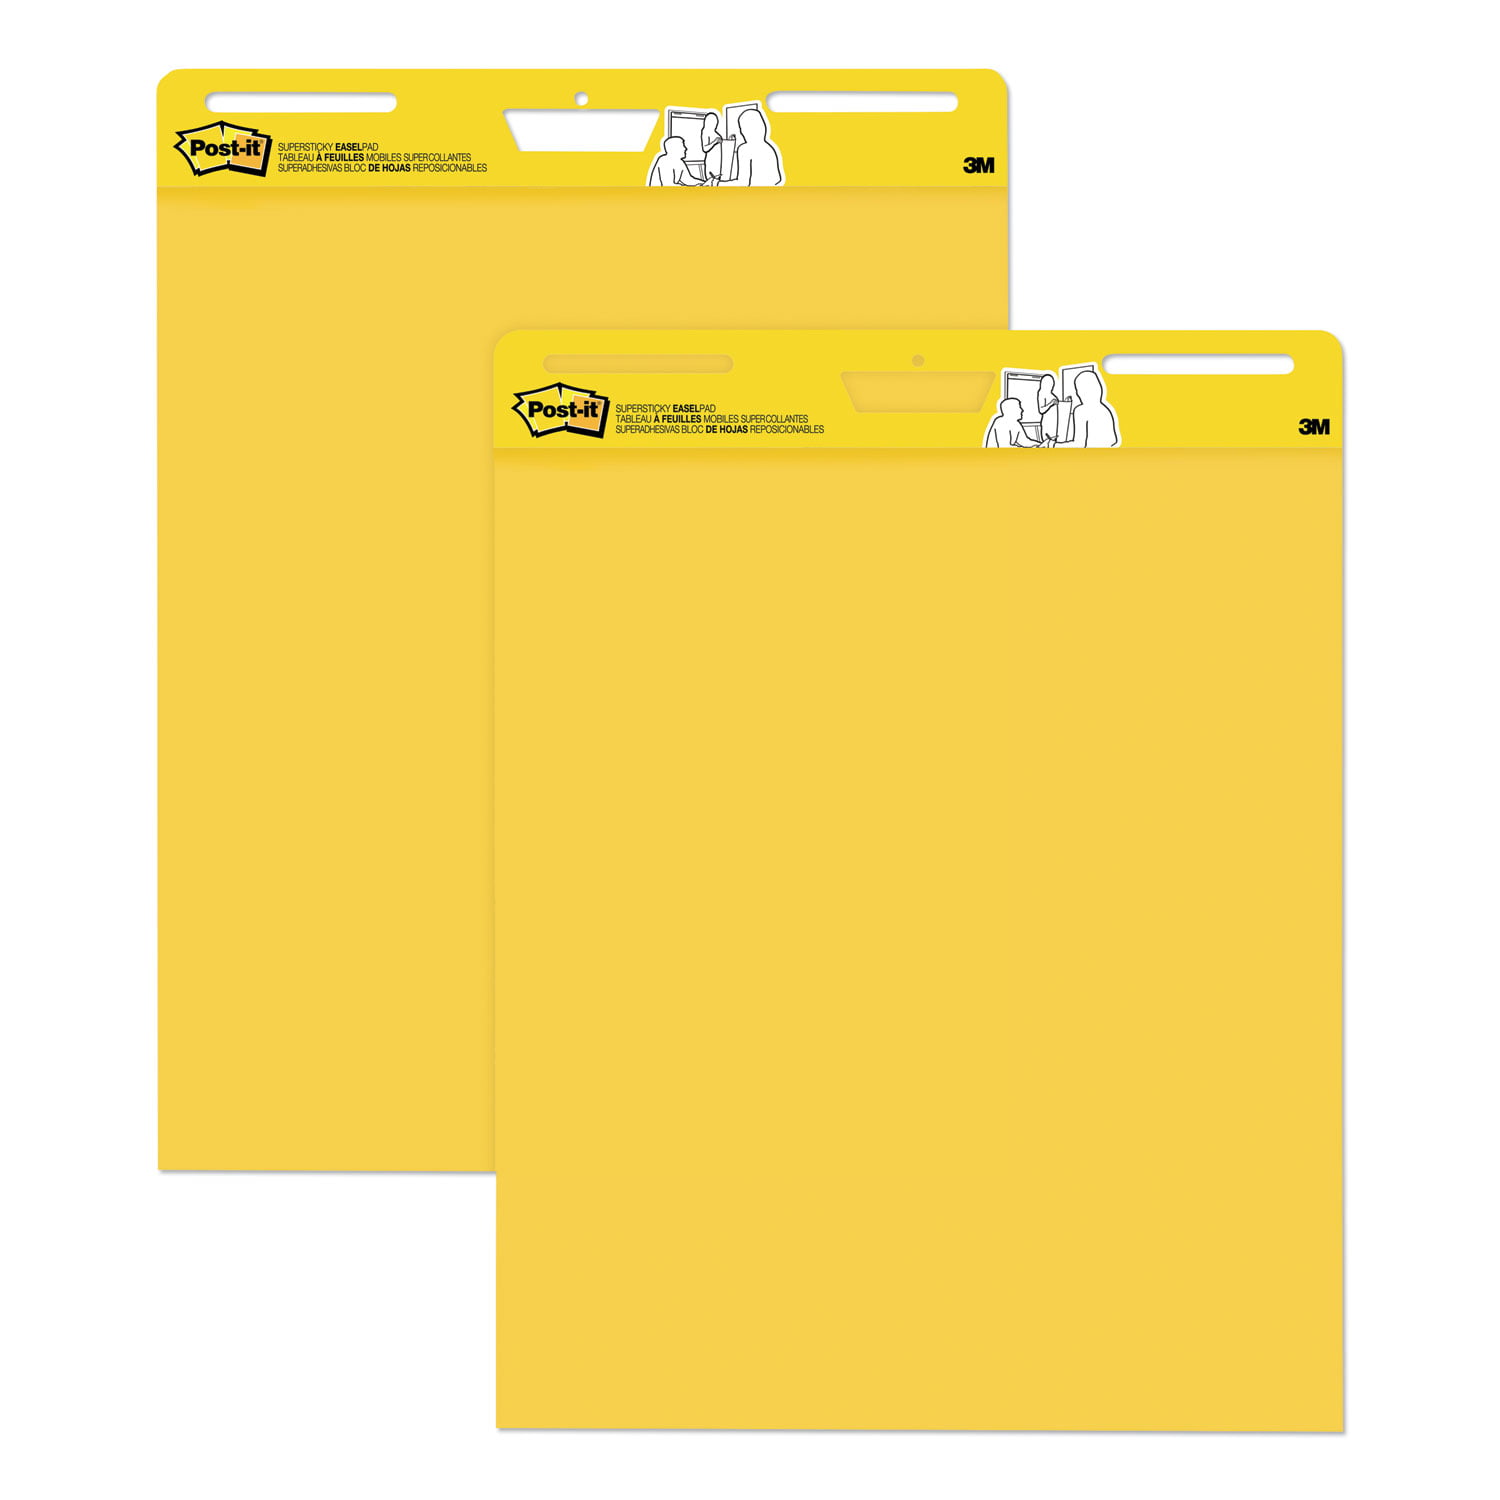  Post-it 561-VAD-4PK Super Sticky Easel Pad, 25 x 30 Inches, 30  Sheets/Pad, 2 Pads (561), Yellow Lined Premium Self Stick Flip Chart Paper,  Super Sticking Power : Easel Pad Lined 